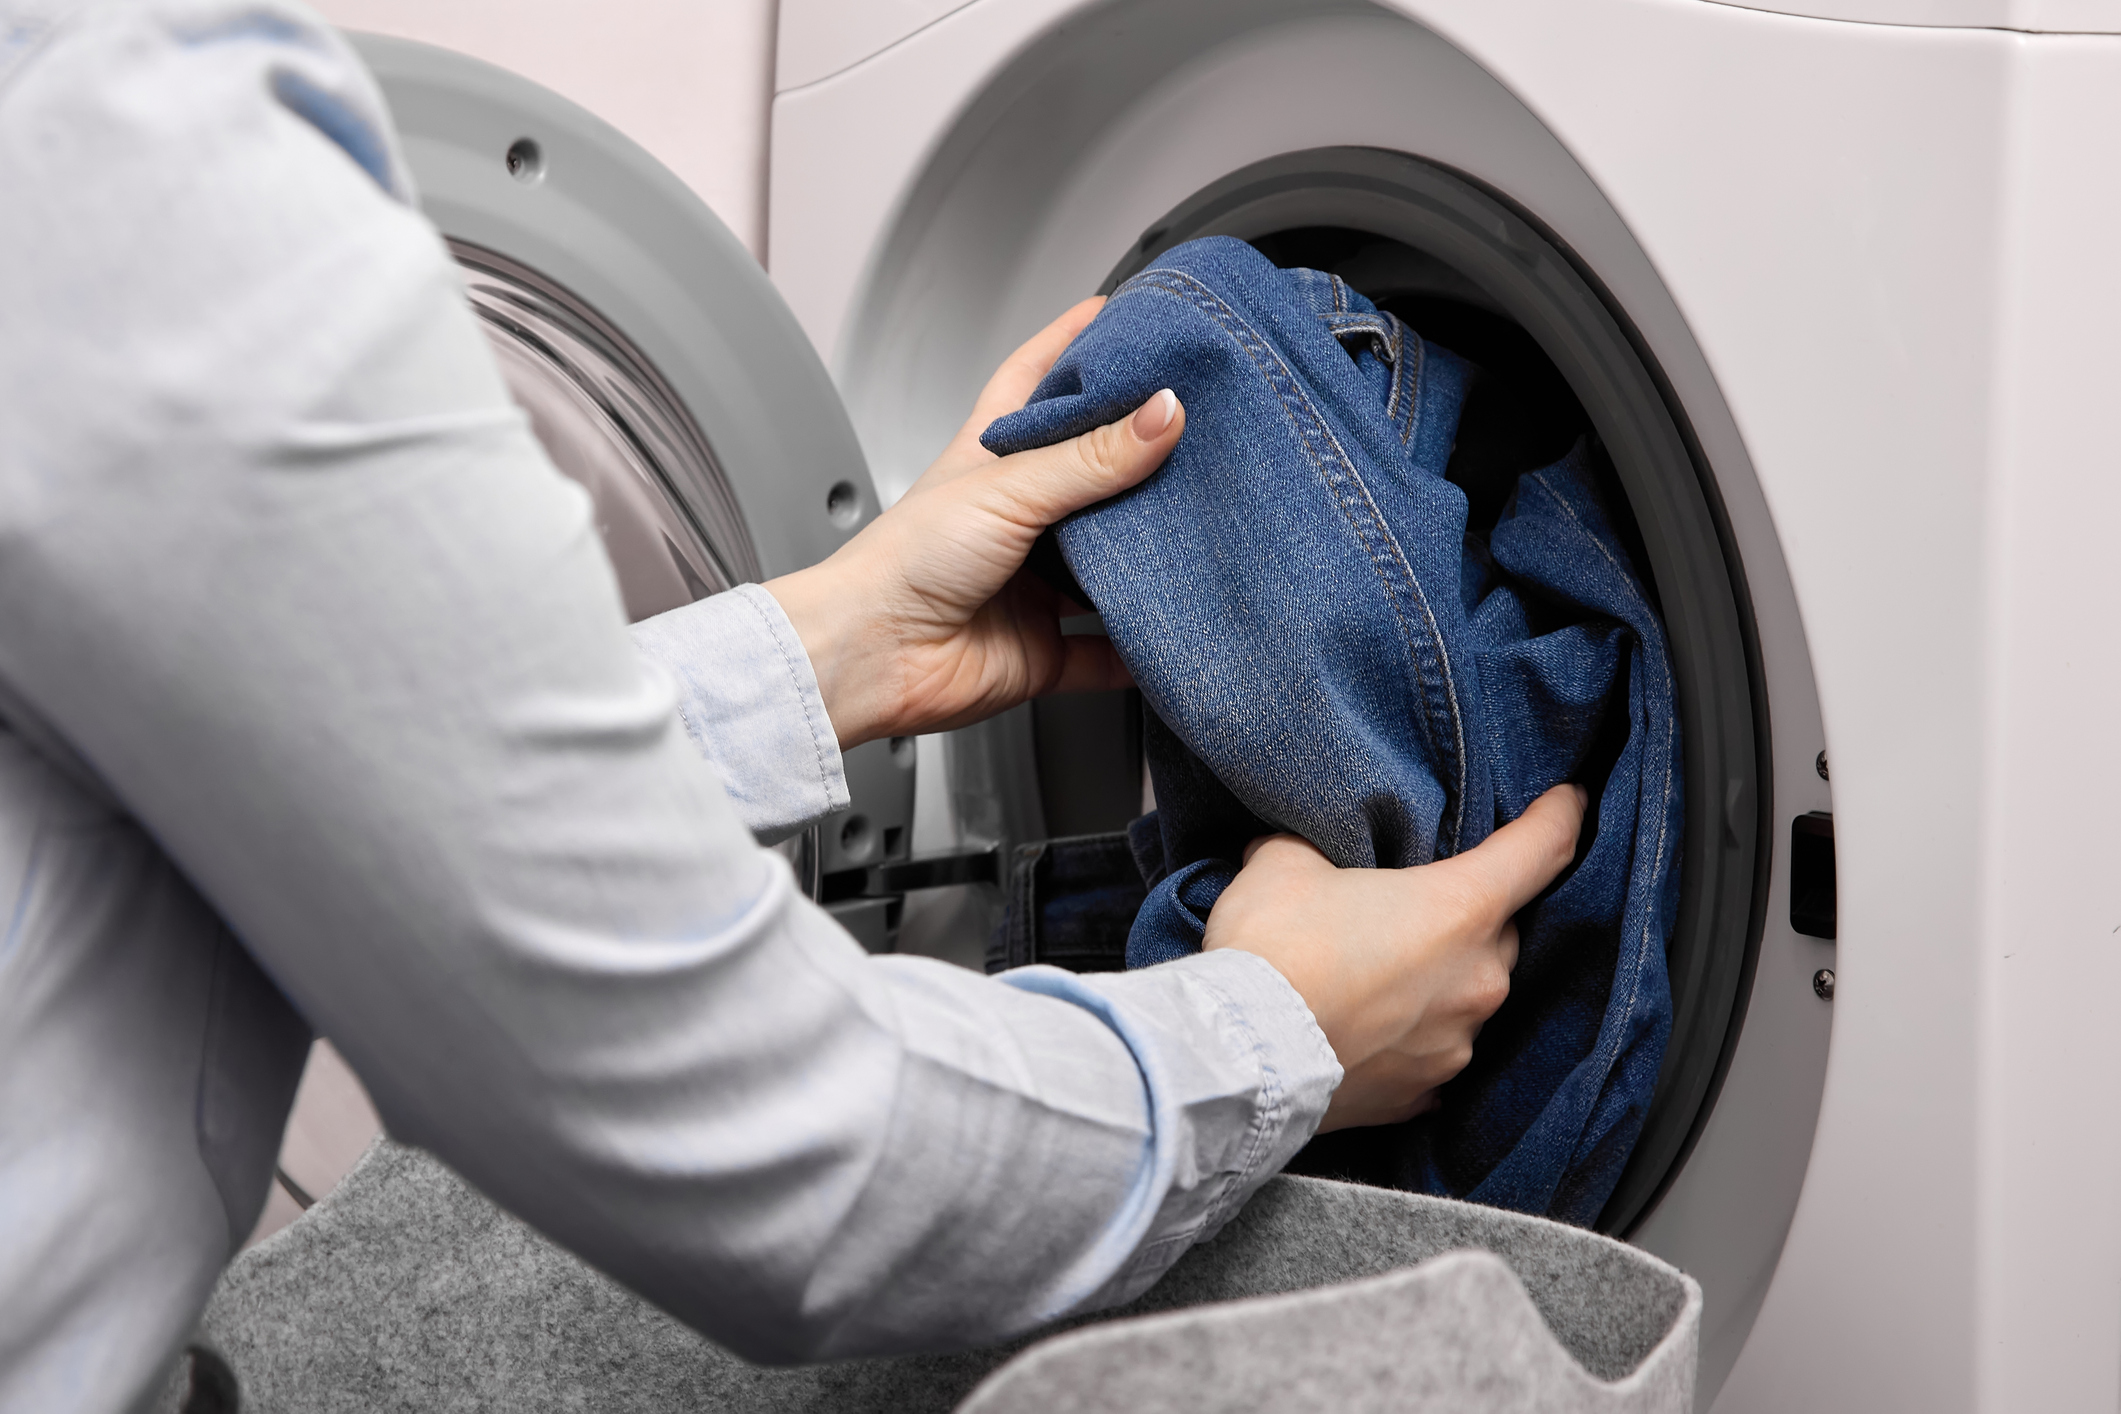 Discover the Best Laundry Services at The Missing Sock DeSoto